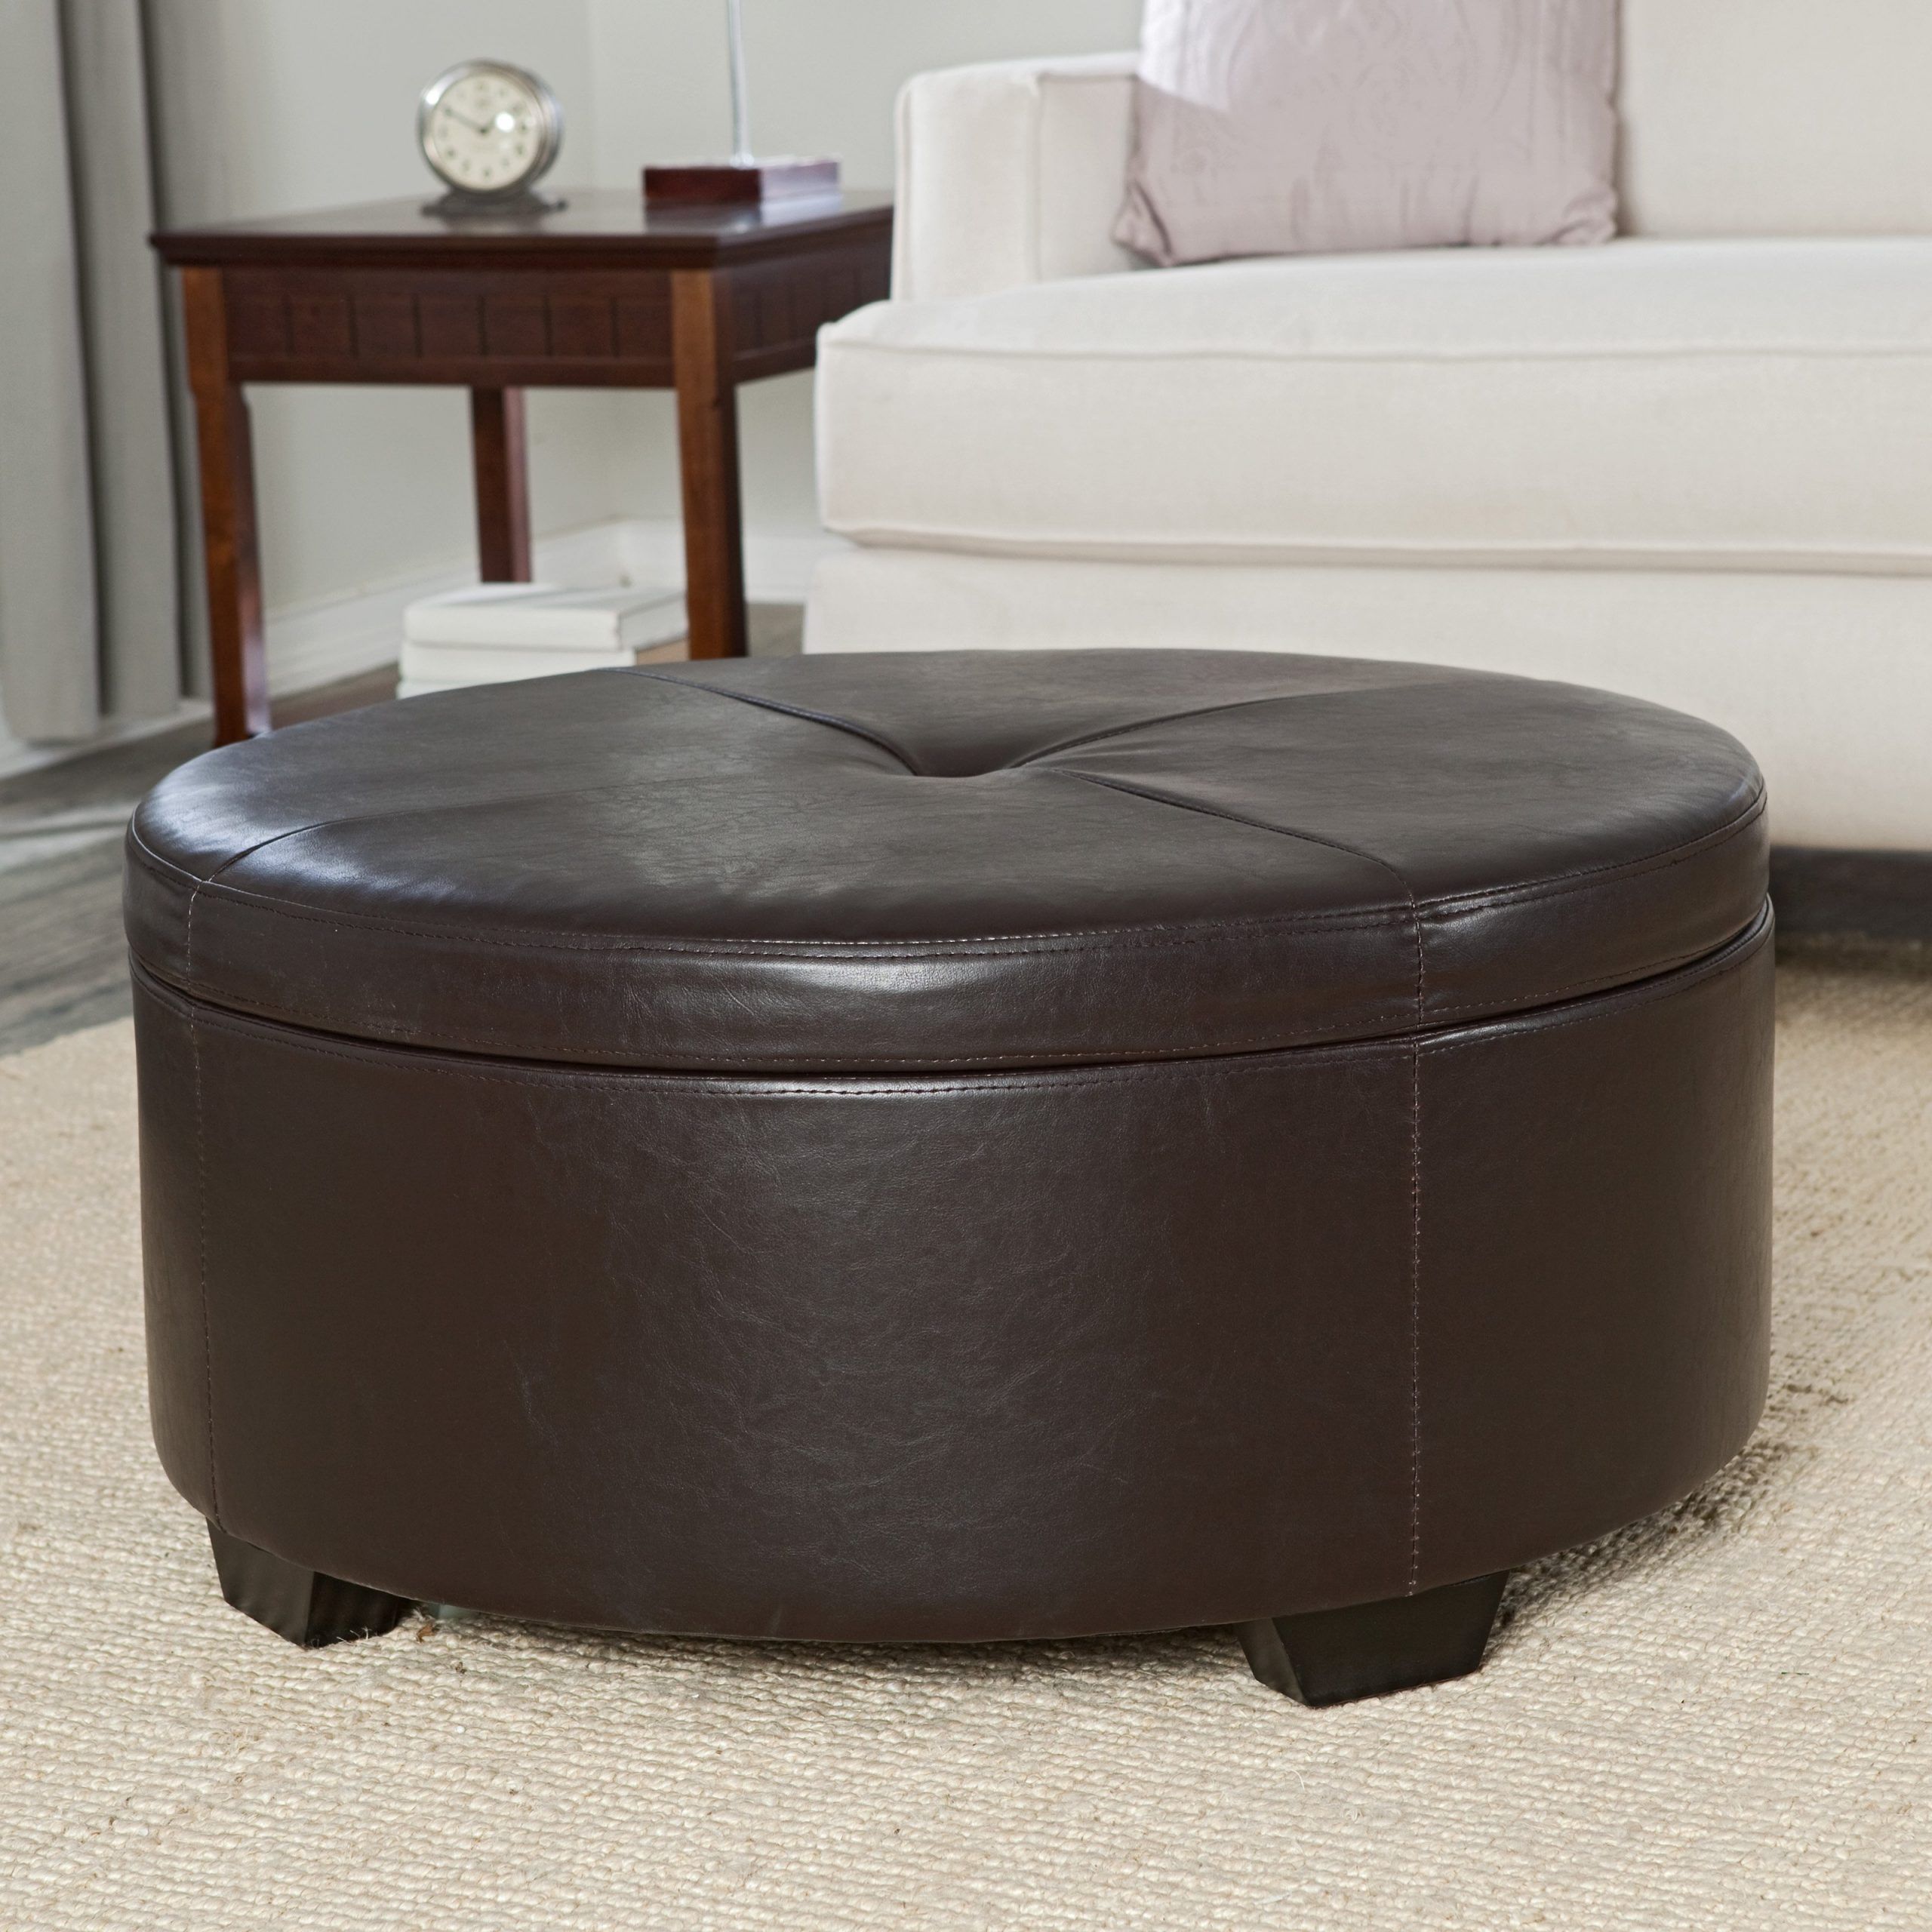 Small Round Ottoman – Homesfeed Regarding Latest Silver And White Leather Round Ottomans (View 1 of 10)